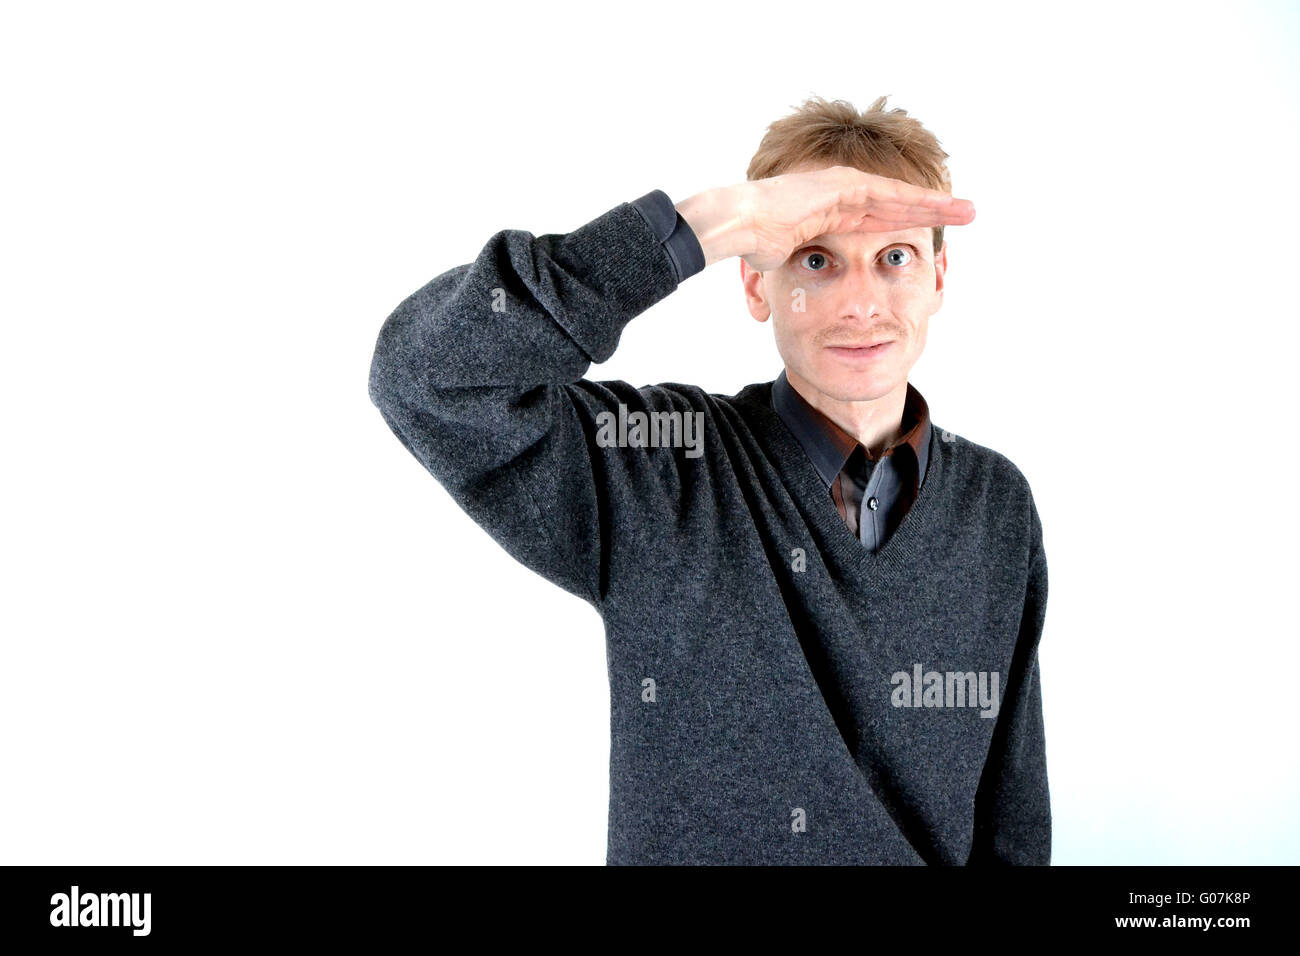 Blond man of keeping a lookout Stock Photo